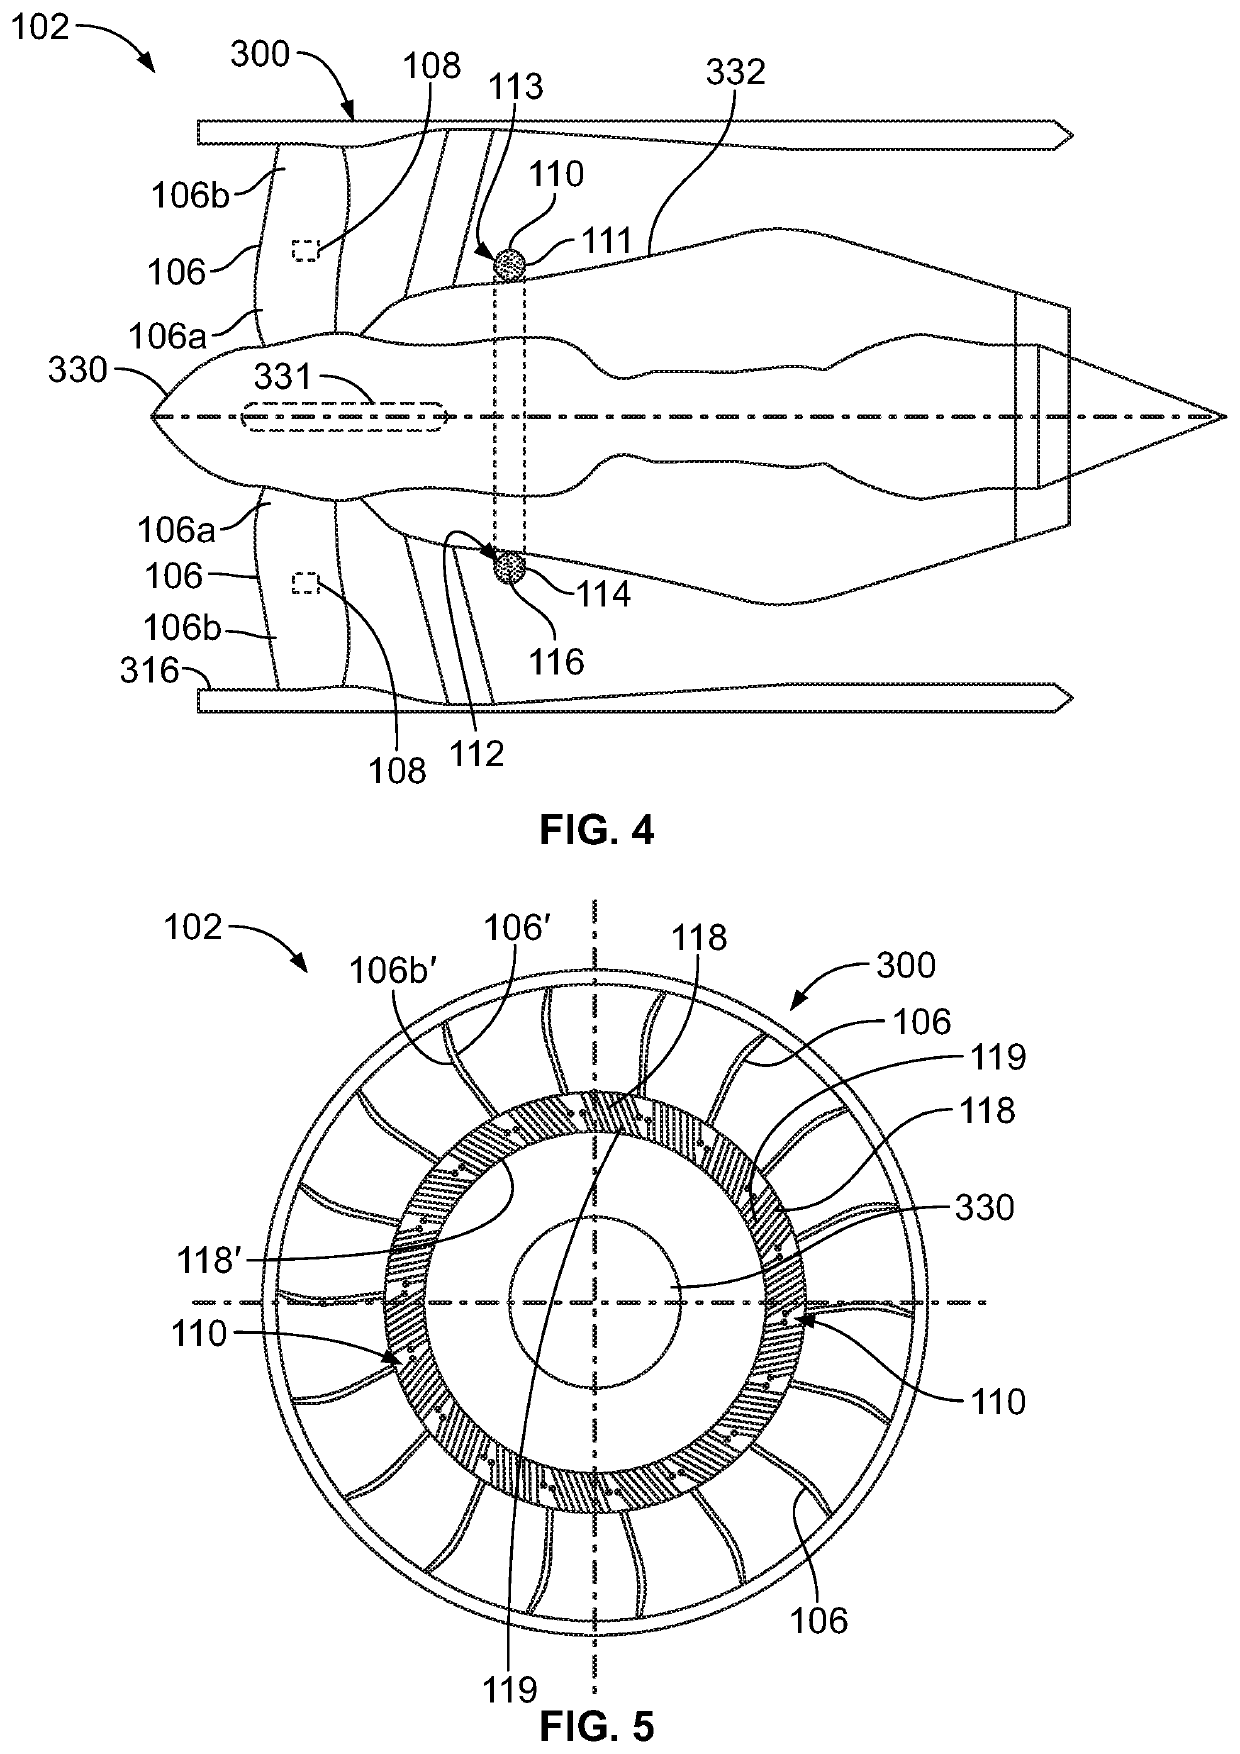 Balancing systems and methods for an engine of an aircraft